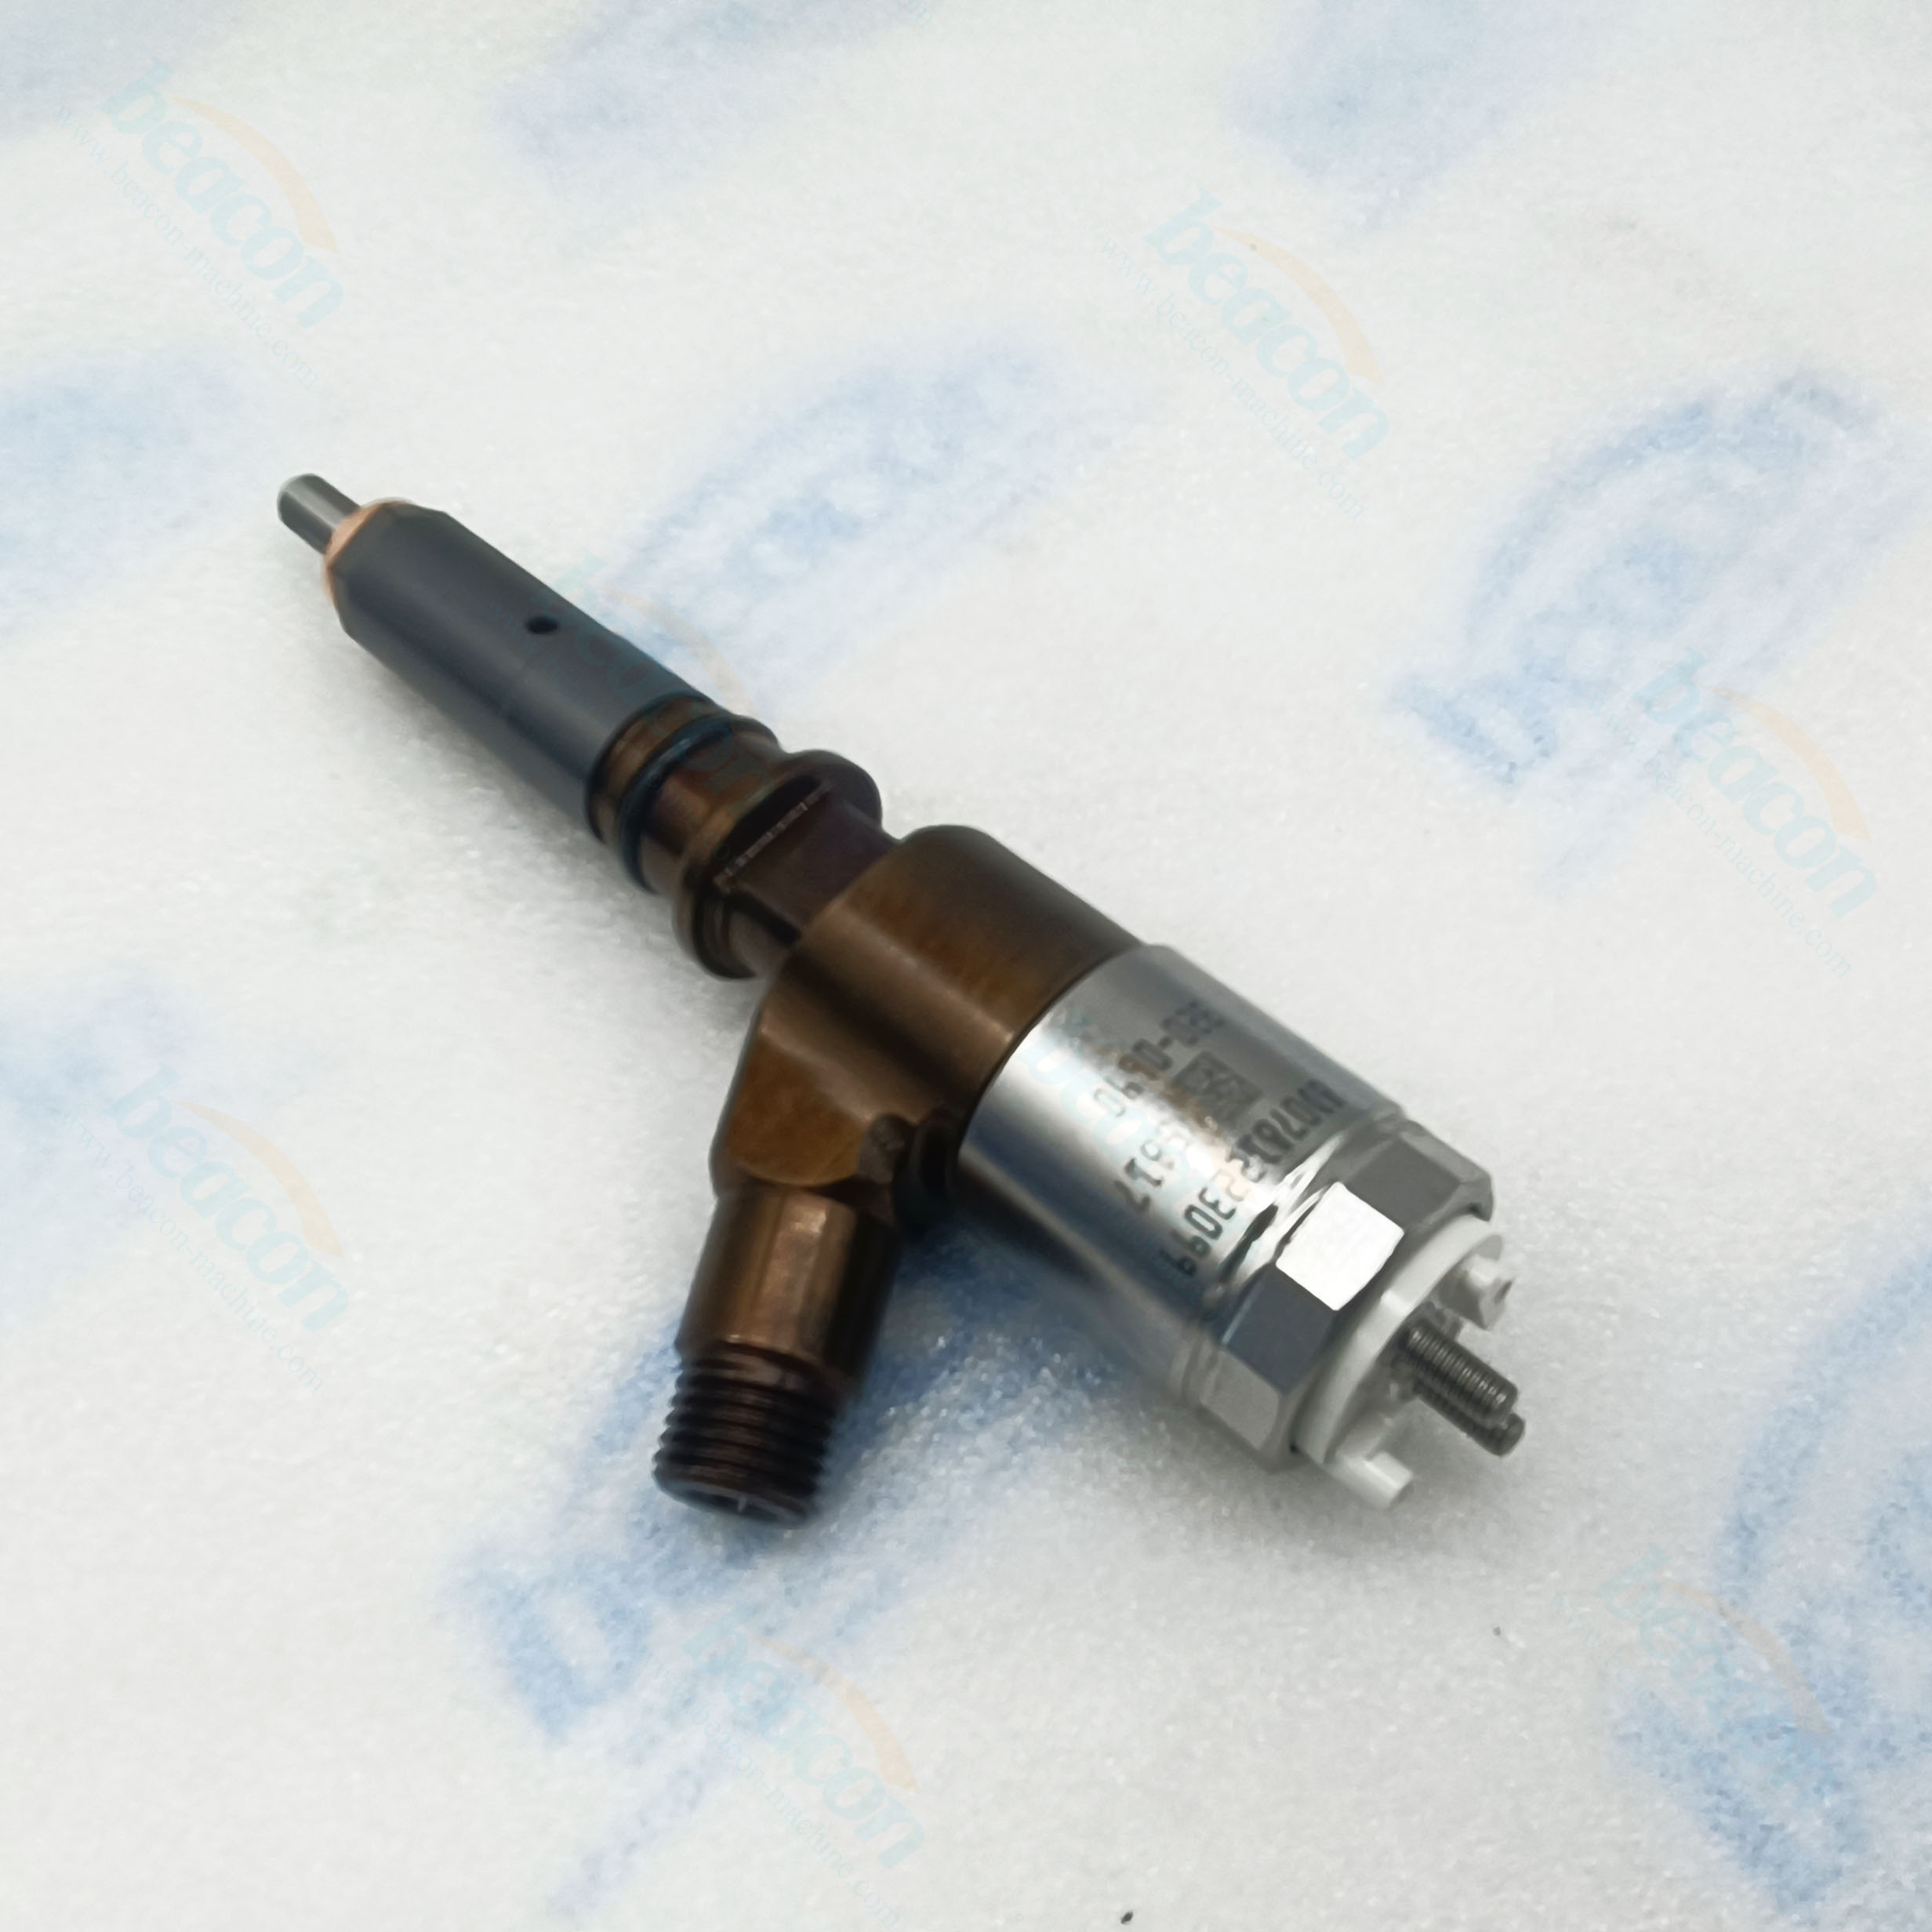 Diesel common rail fuel injector 2645A749 320-0690 for CAT Excavator